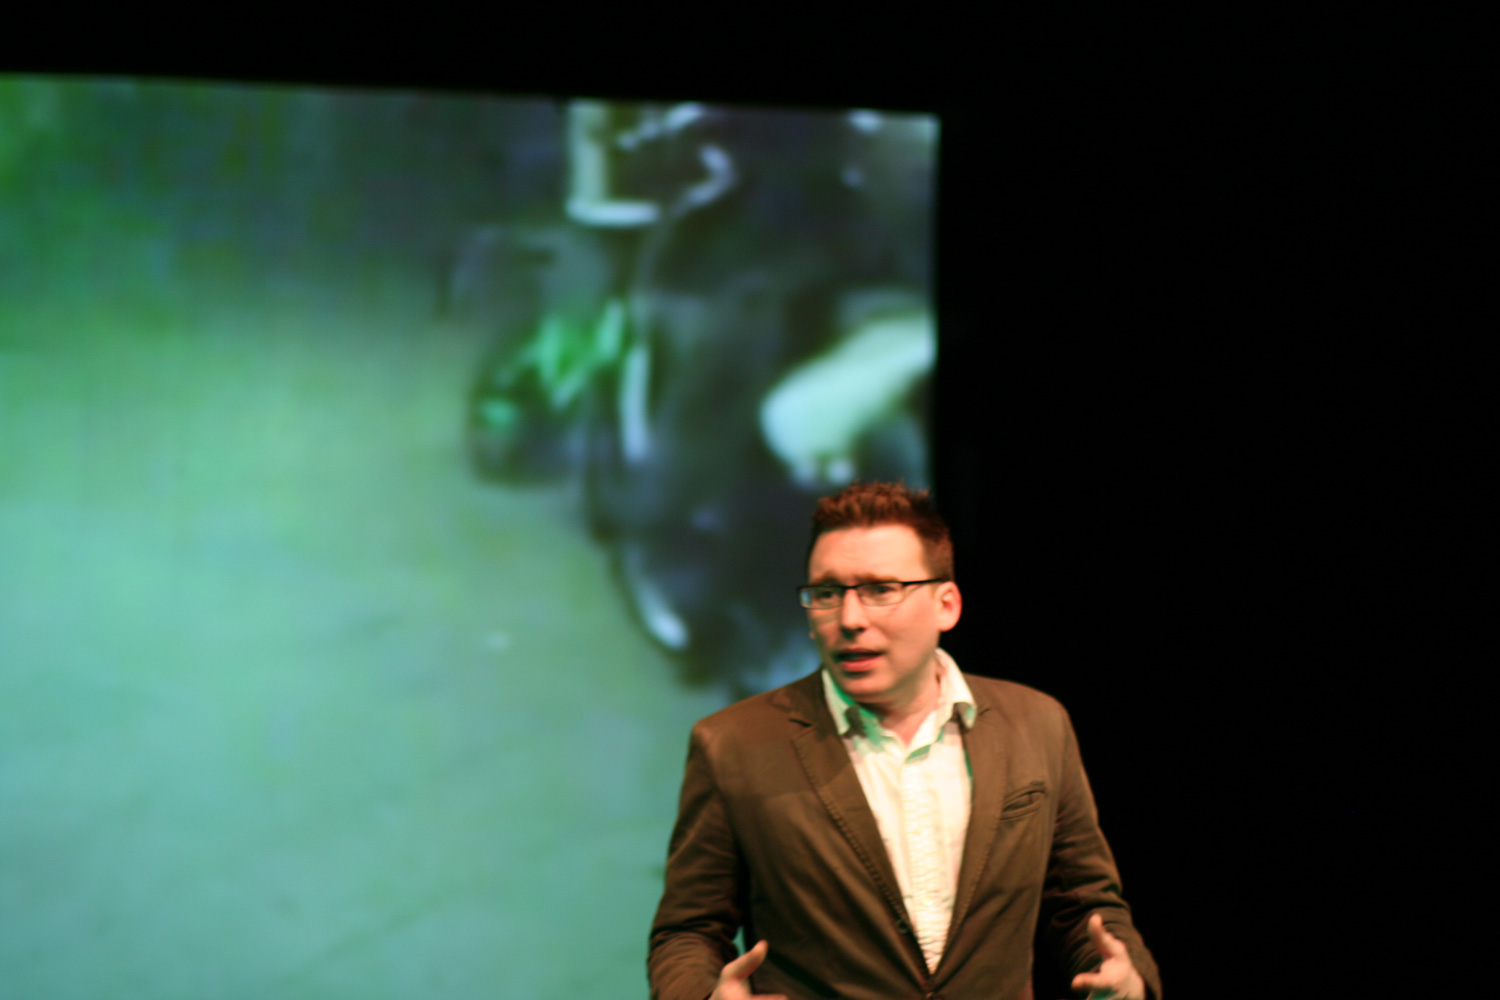 a man standing in front of a projected green image